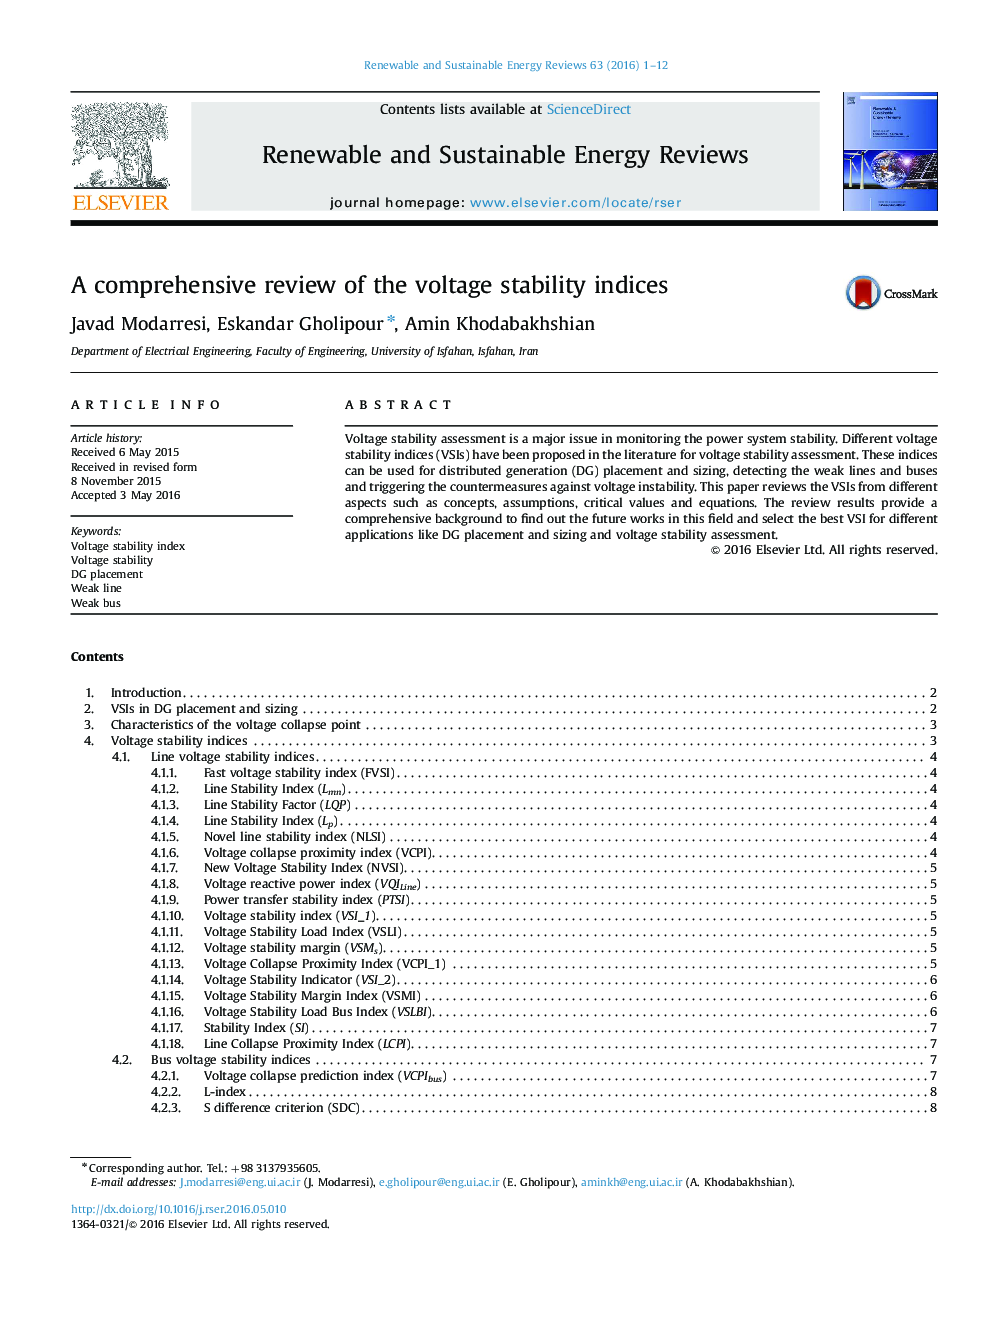 A comprehensive review of the voltage stability indices